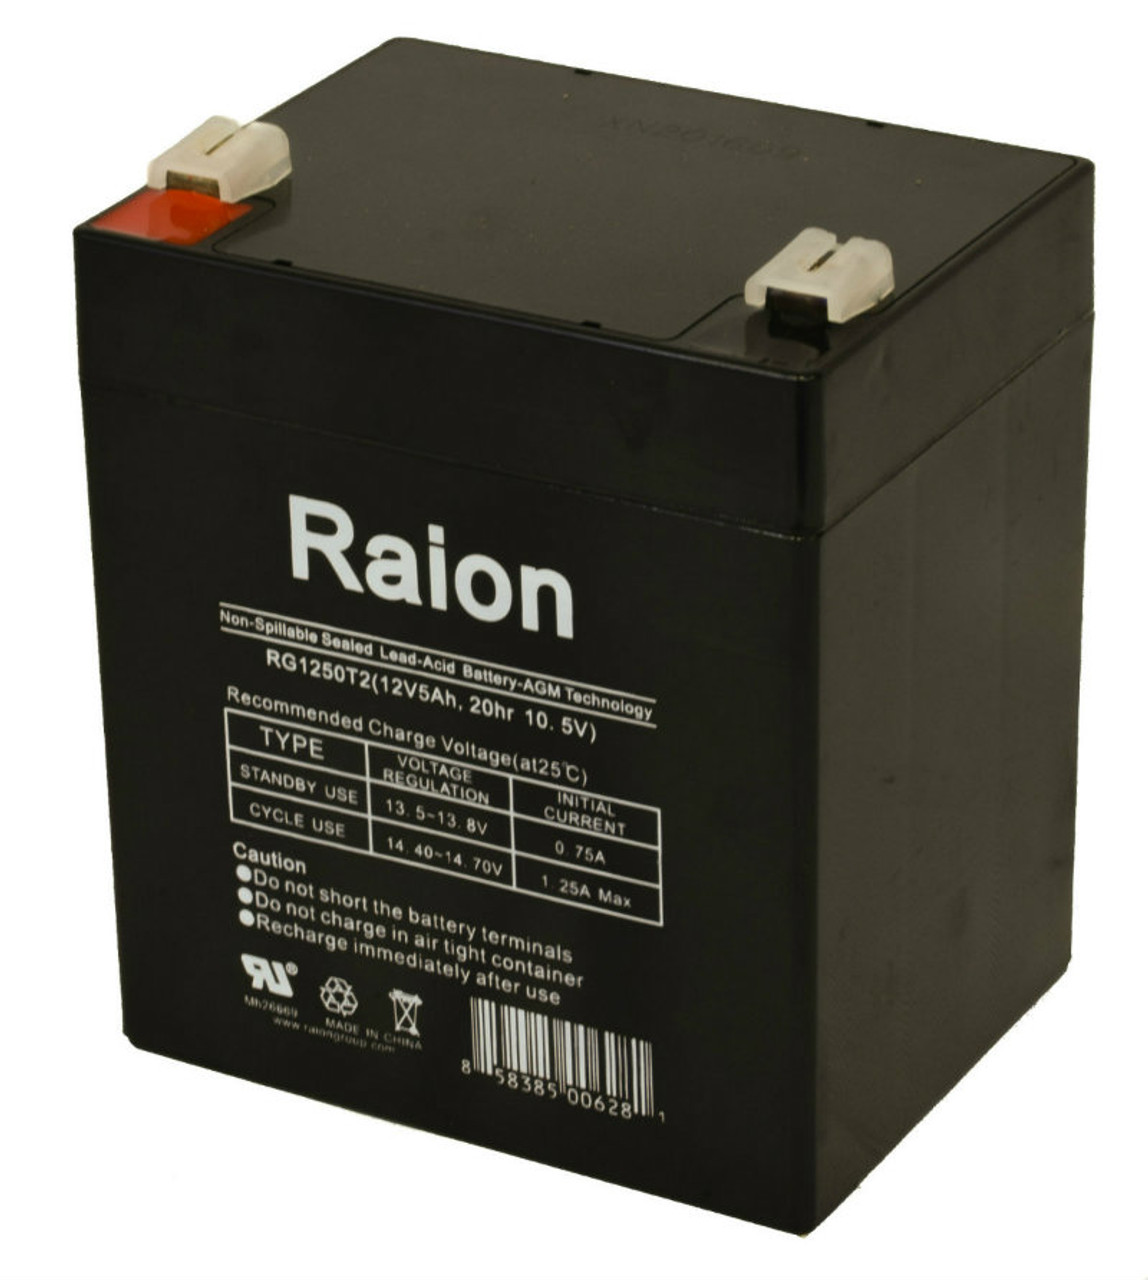 Raion Power RG1250T1 Replacement Emergency Light Battery for Silent Knight 712